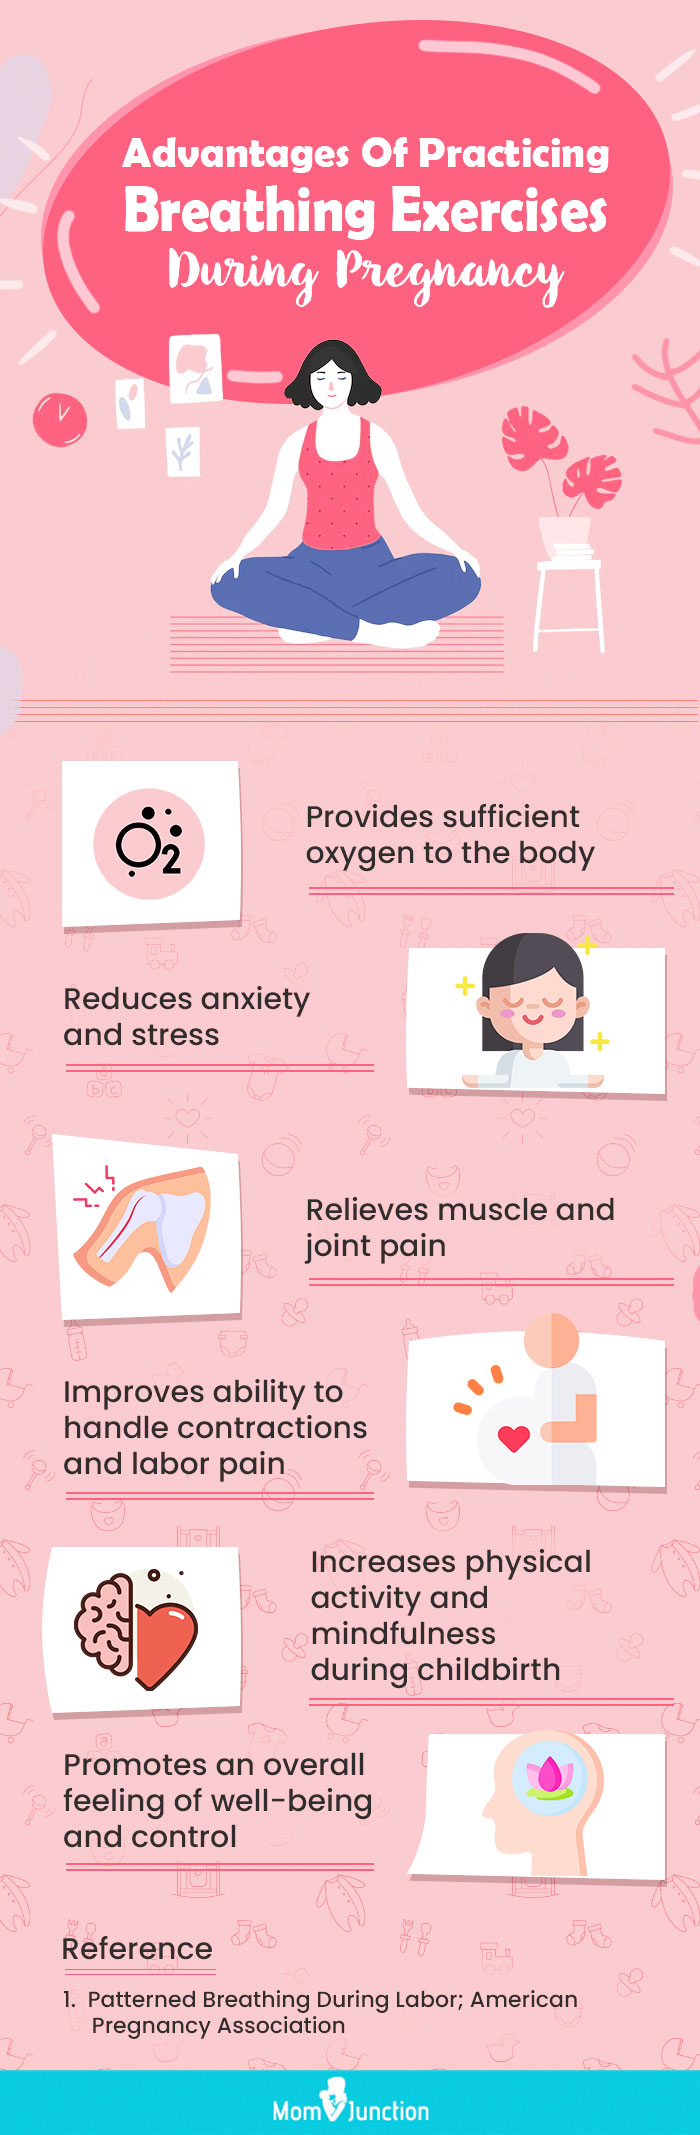 advantages of practicing breathing exercises during pregnancy (infographic)